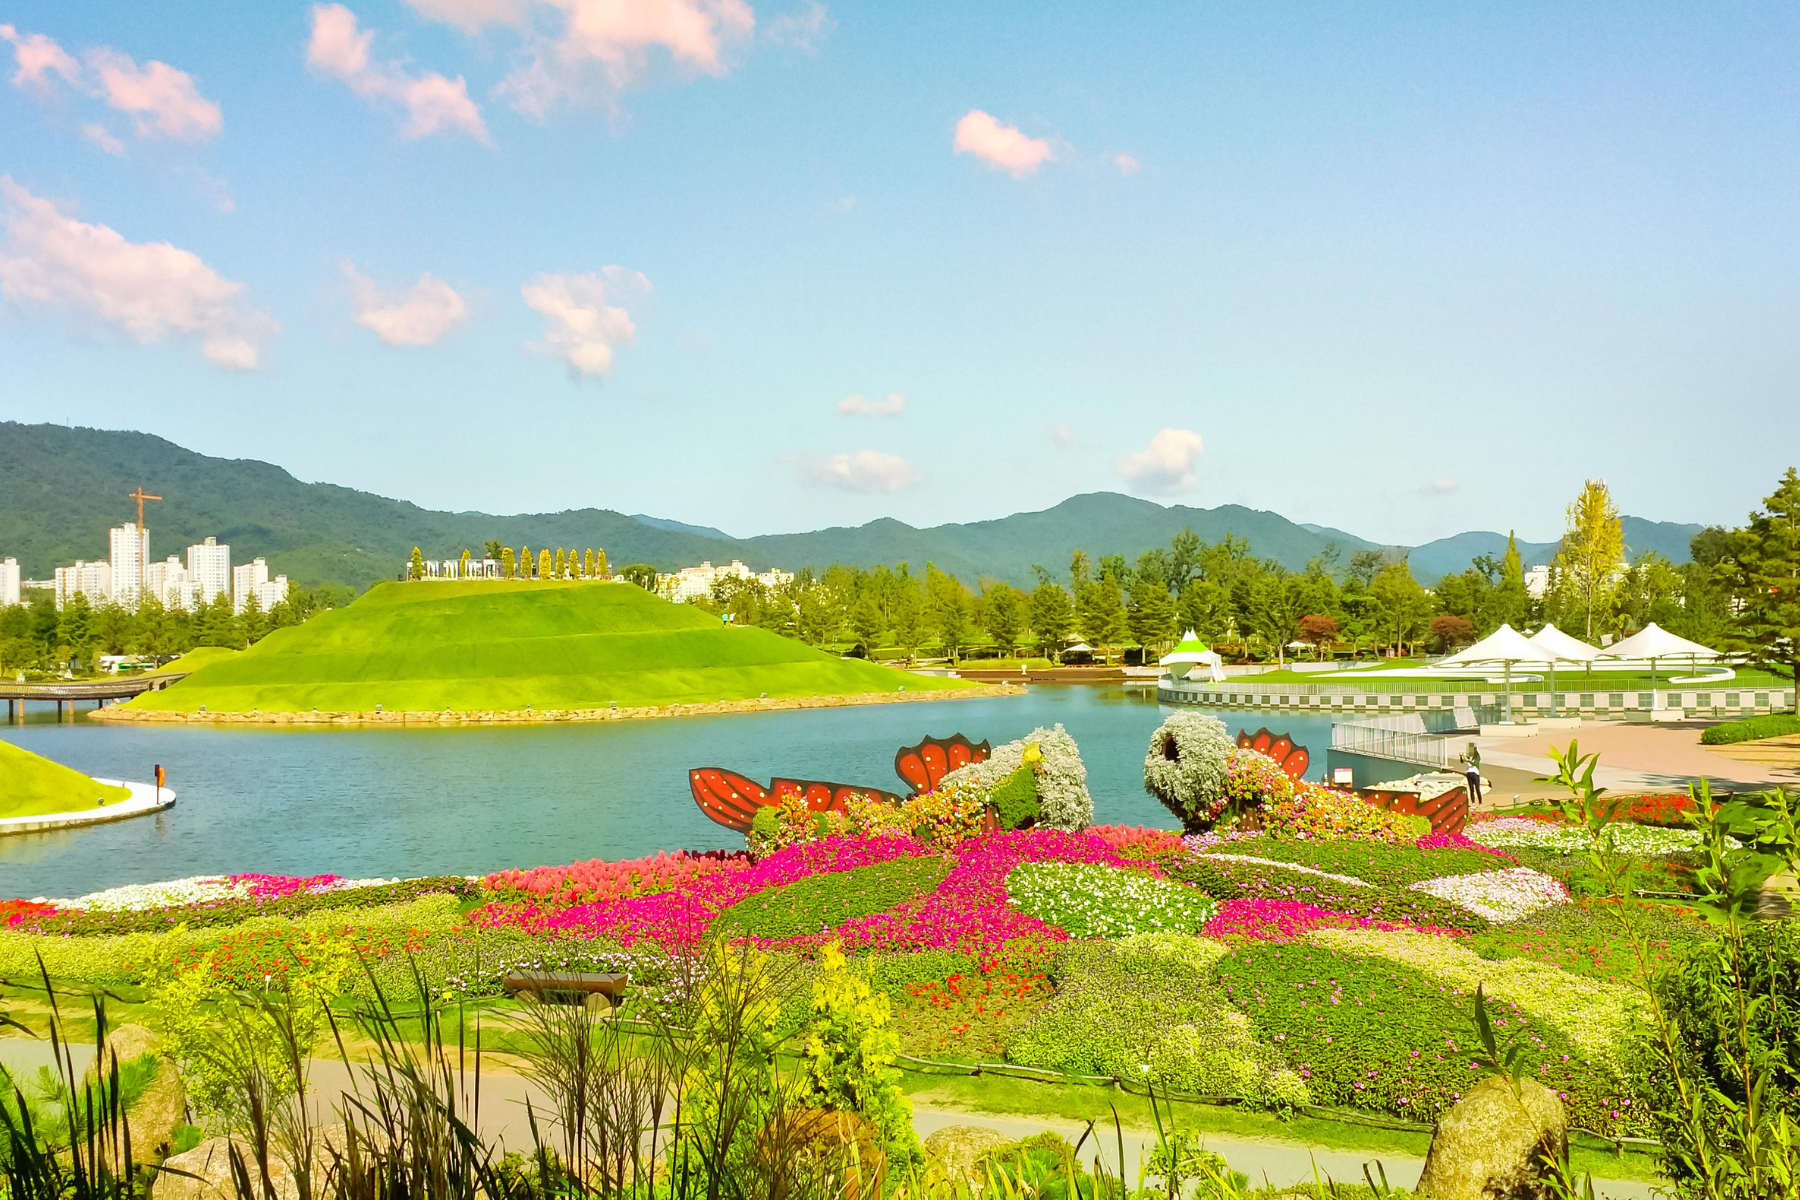 Suncheon Bay's lovely garden and river